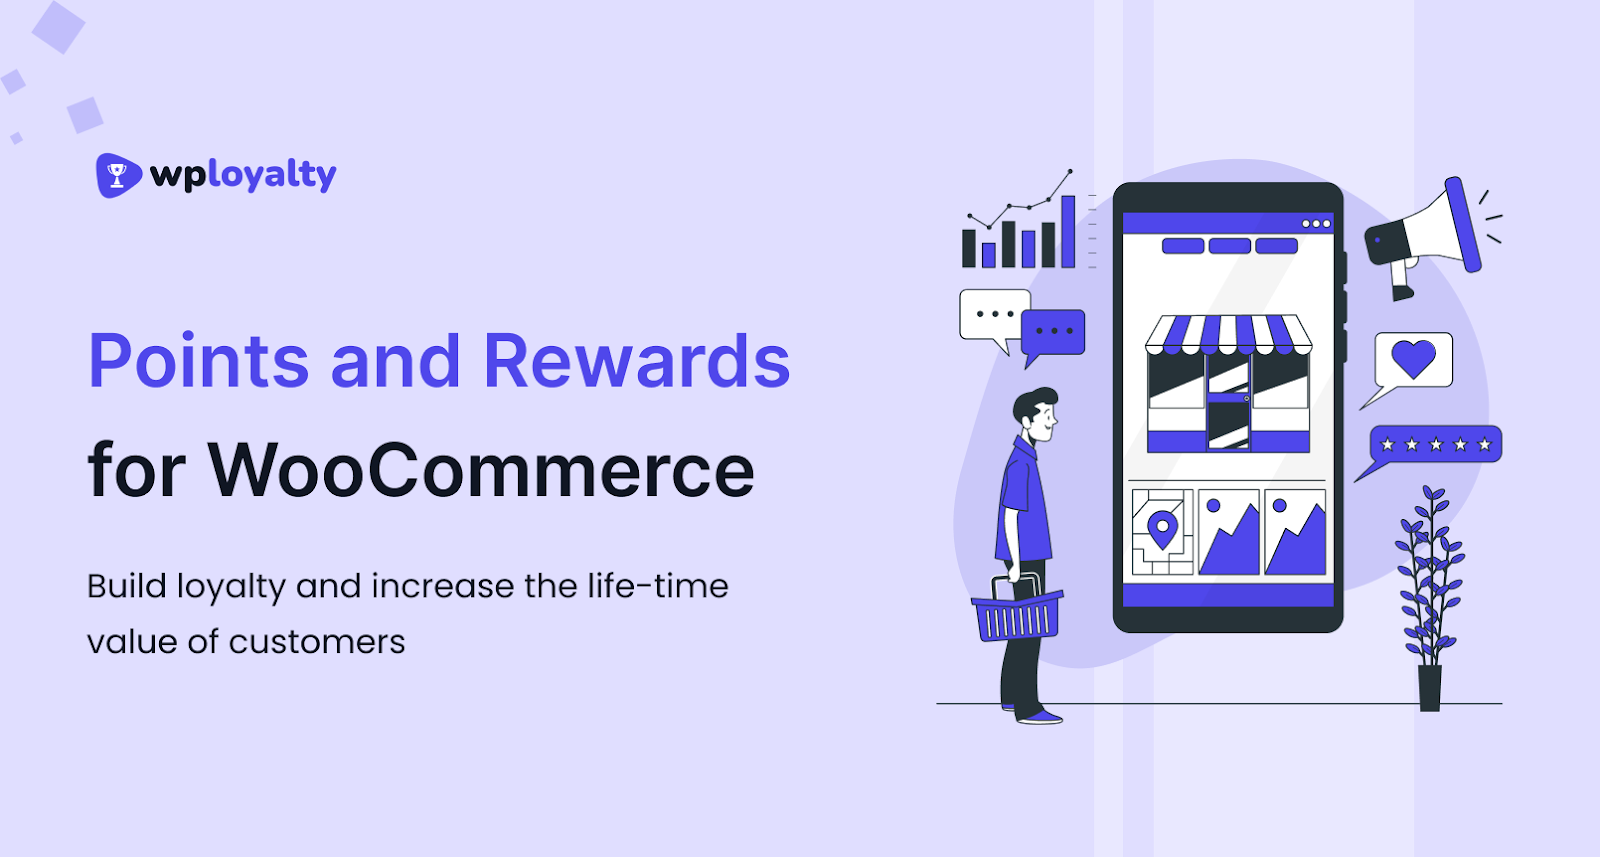 WPLoyalty: Points and Rewards for WooCommerce